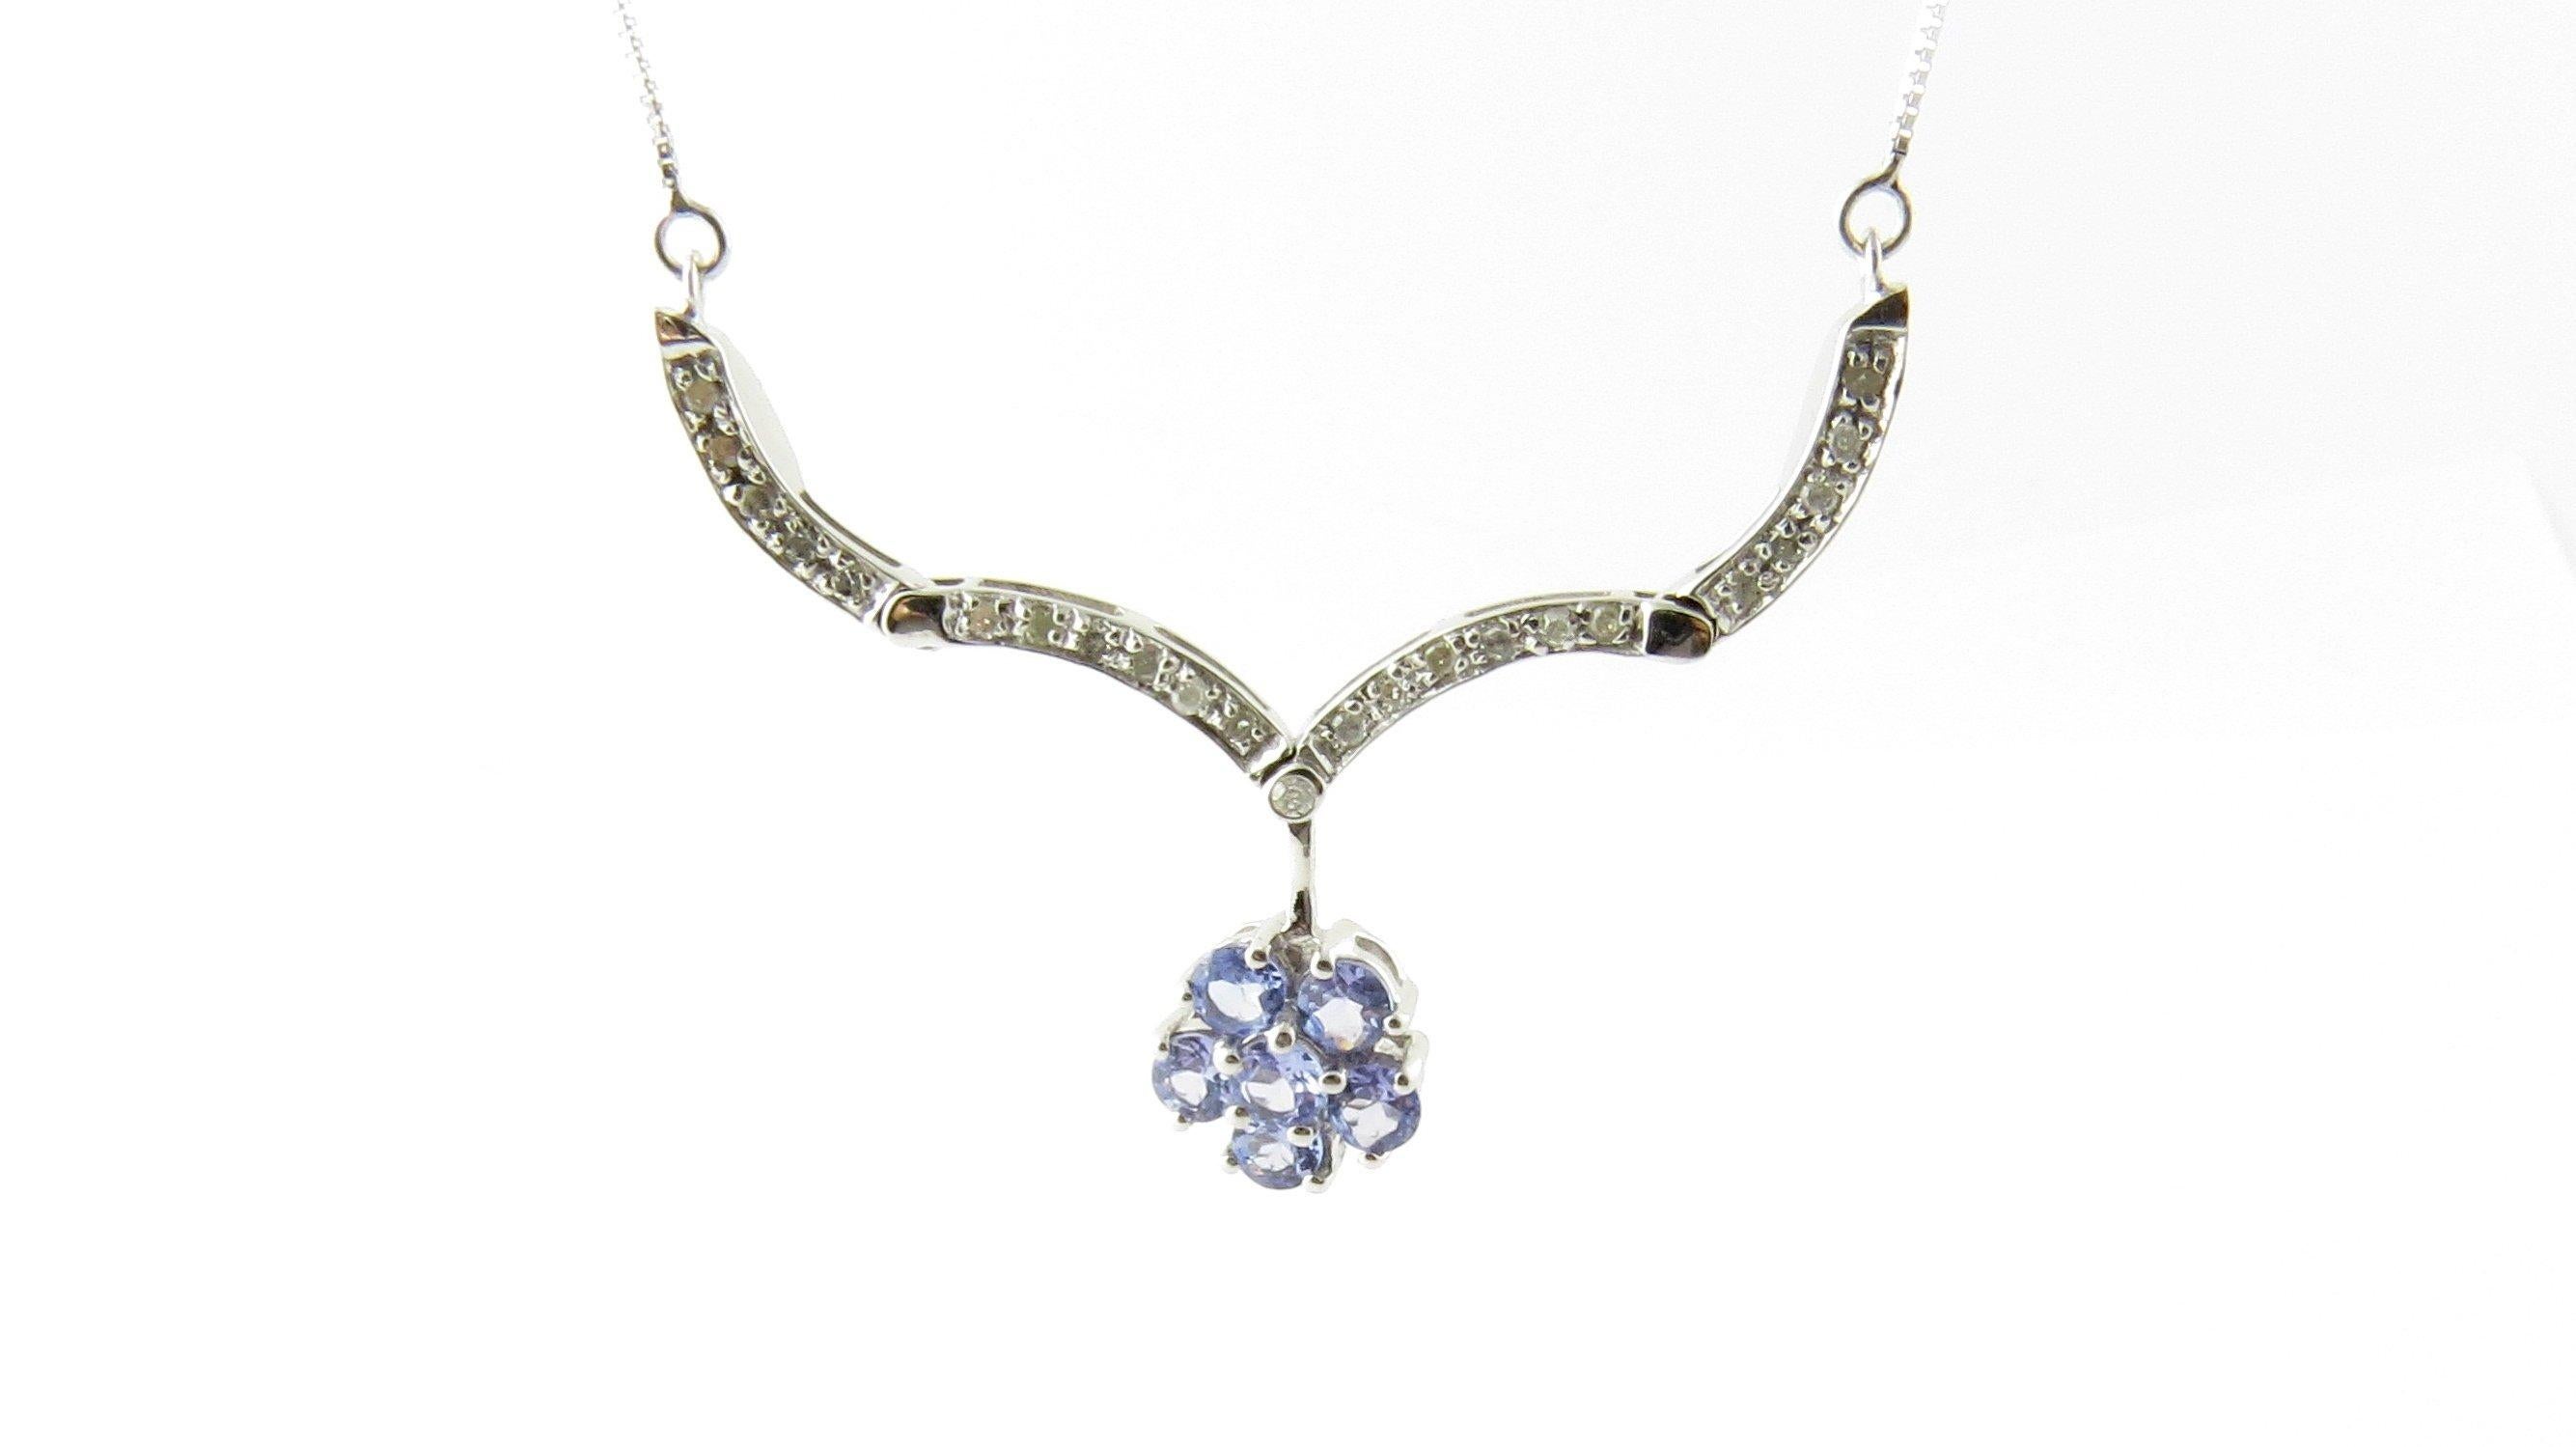 Vintage 10 Karat White Gold Genuine Tanzanite and Diamond Pendant Necklace. This lovely pendant features six round genuine tanzanite gemstones (4 mm each) surrounded by 22 round single cut diamonds suspended from a classic white gold